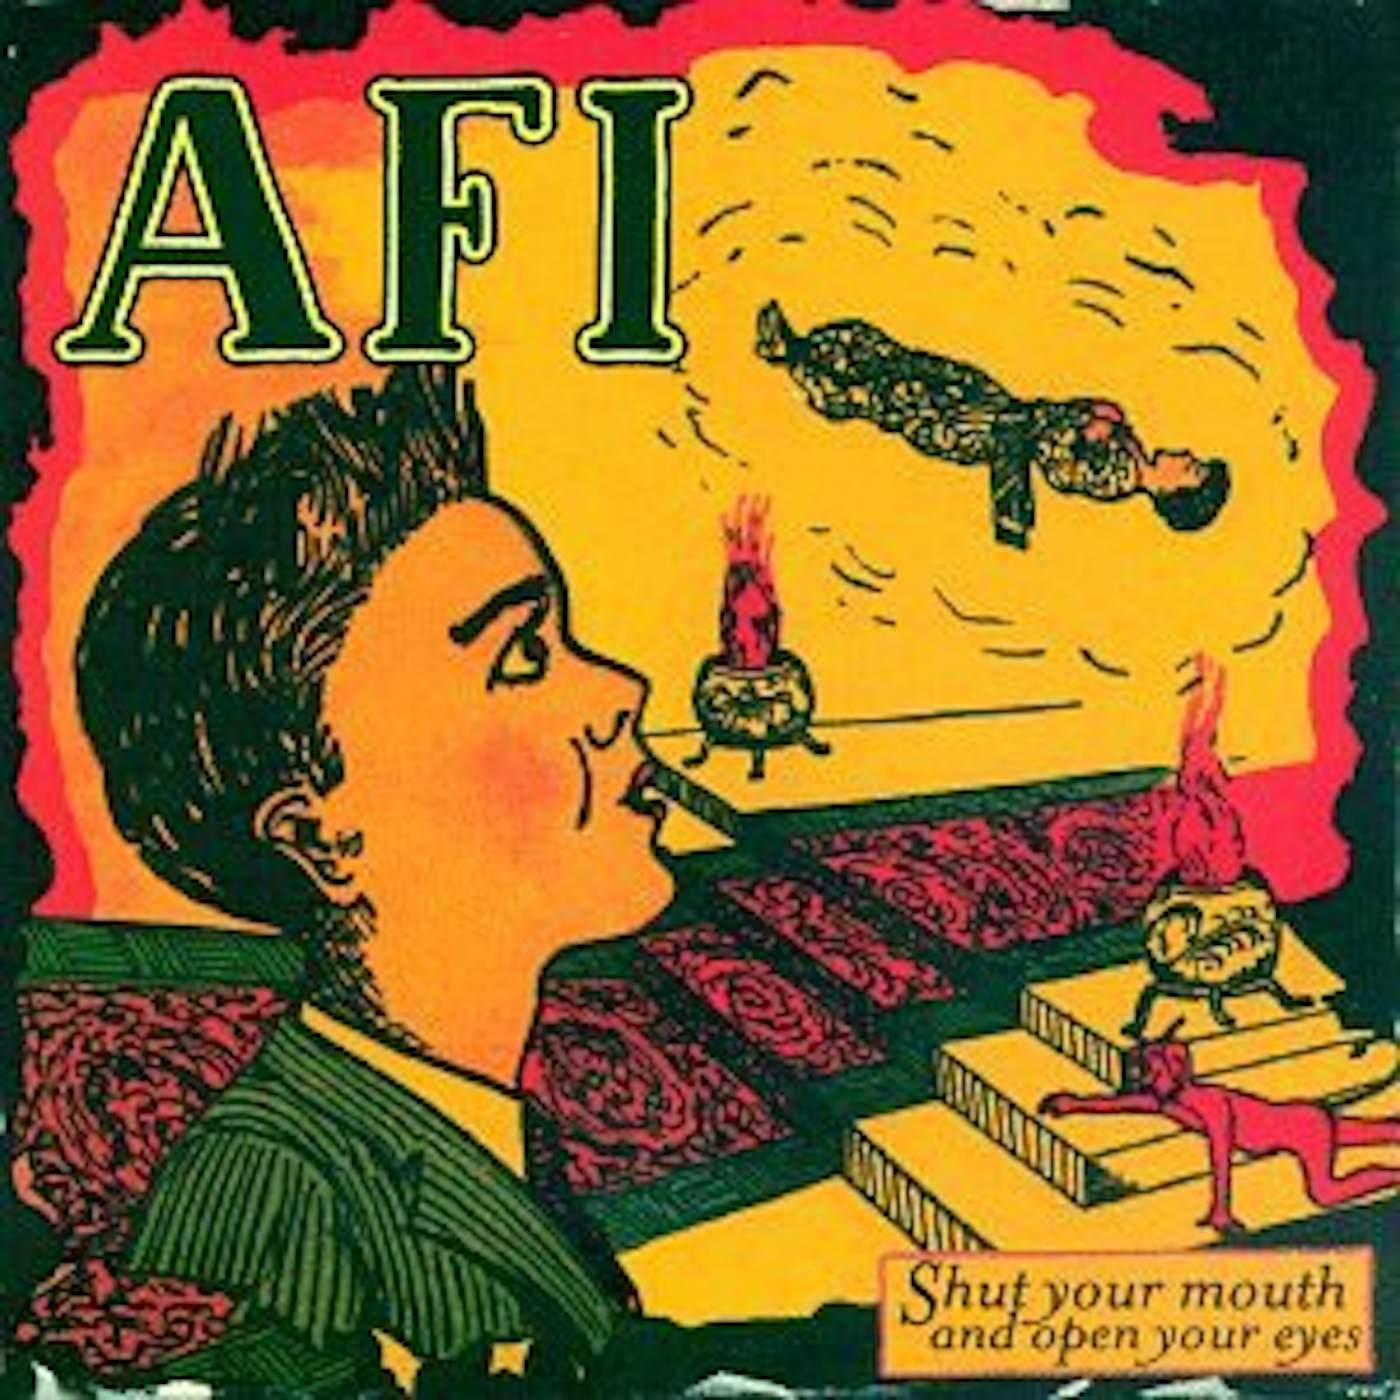 AFI SHUT YOUR MOUTH & OPEN YOUR EYES CD